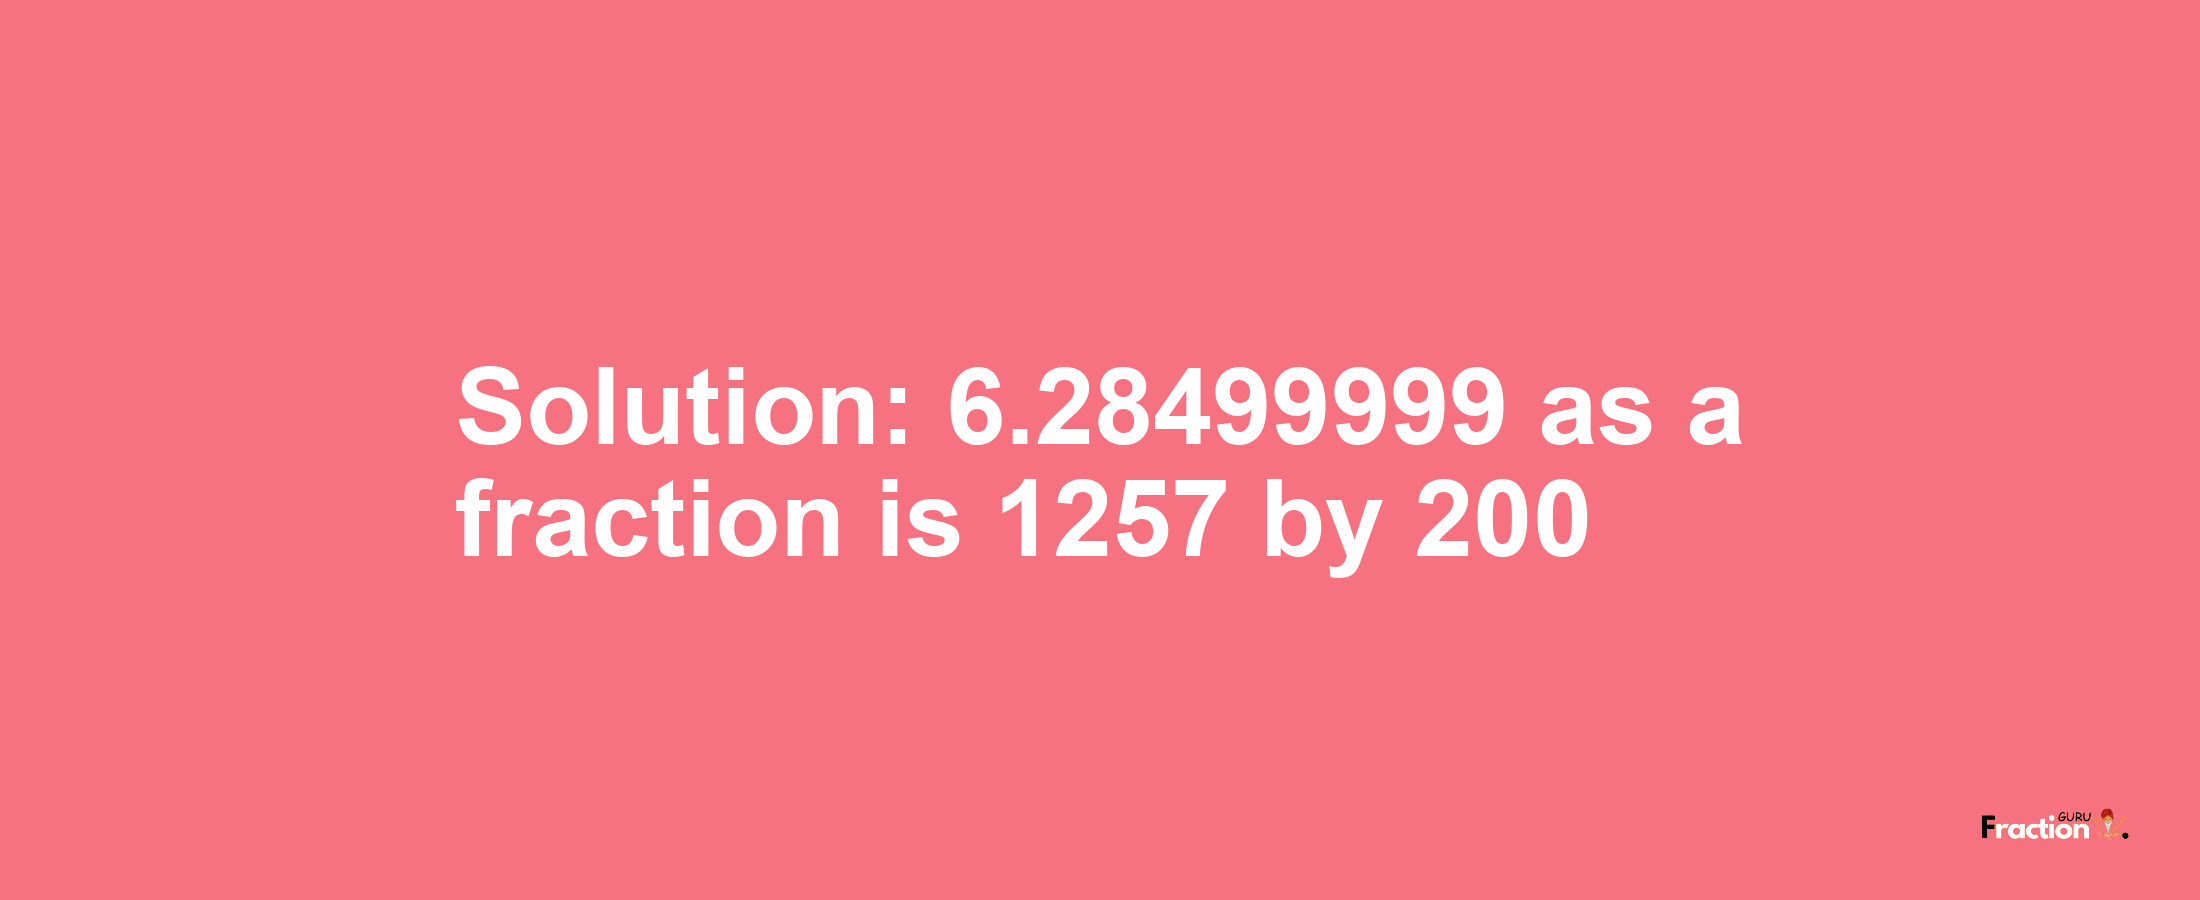 Solution:6.28499999 as a fraction is 1257/200